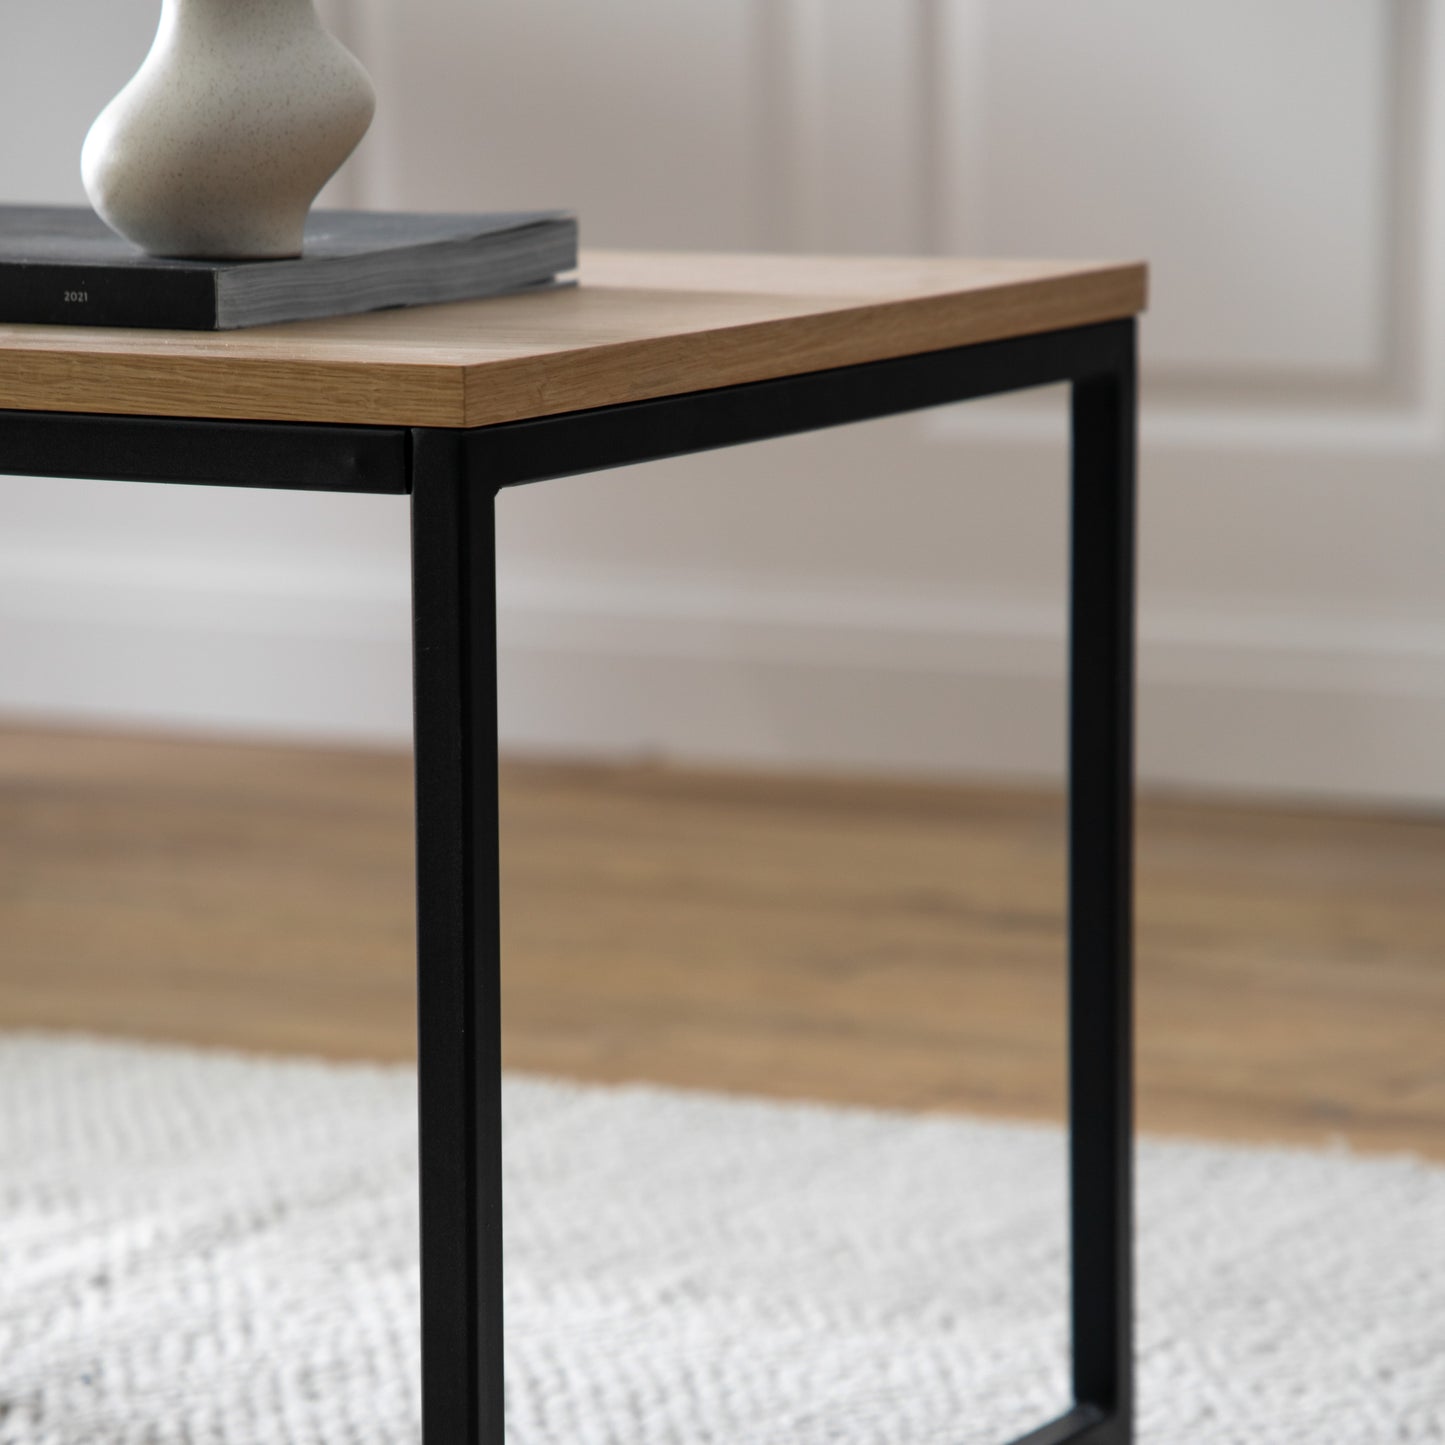 A Staverton Coffee Table 1000x500x450mm with a vase on top of it for interior decor and home furniture purposes.